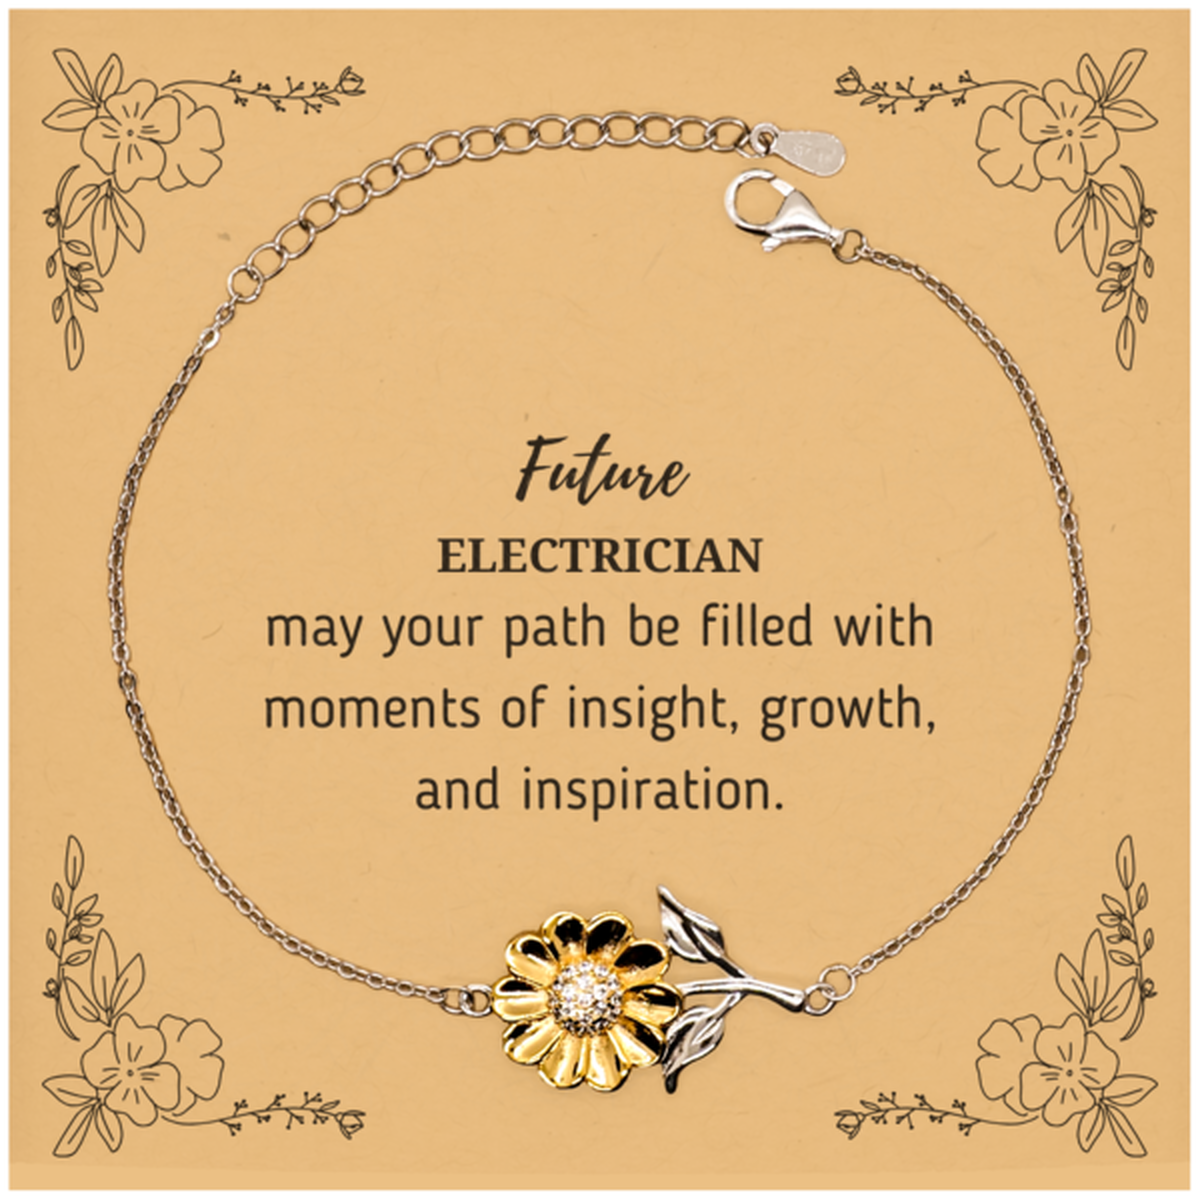 Future Electrician Gifts, May your path be filled with moments of insight, Graduation Gifts for New Electrician, Christmas Unique Sunflower Bracelet For Men, Women, Friends